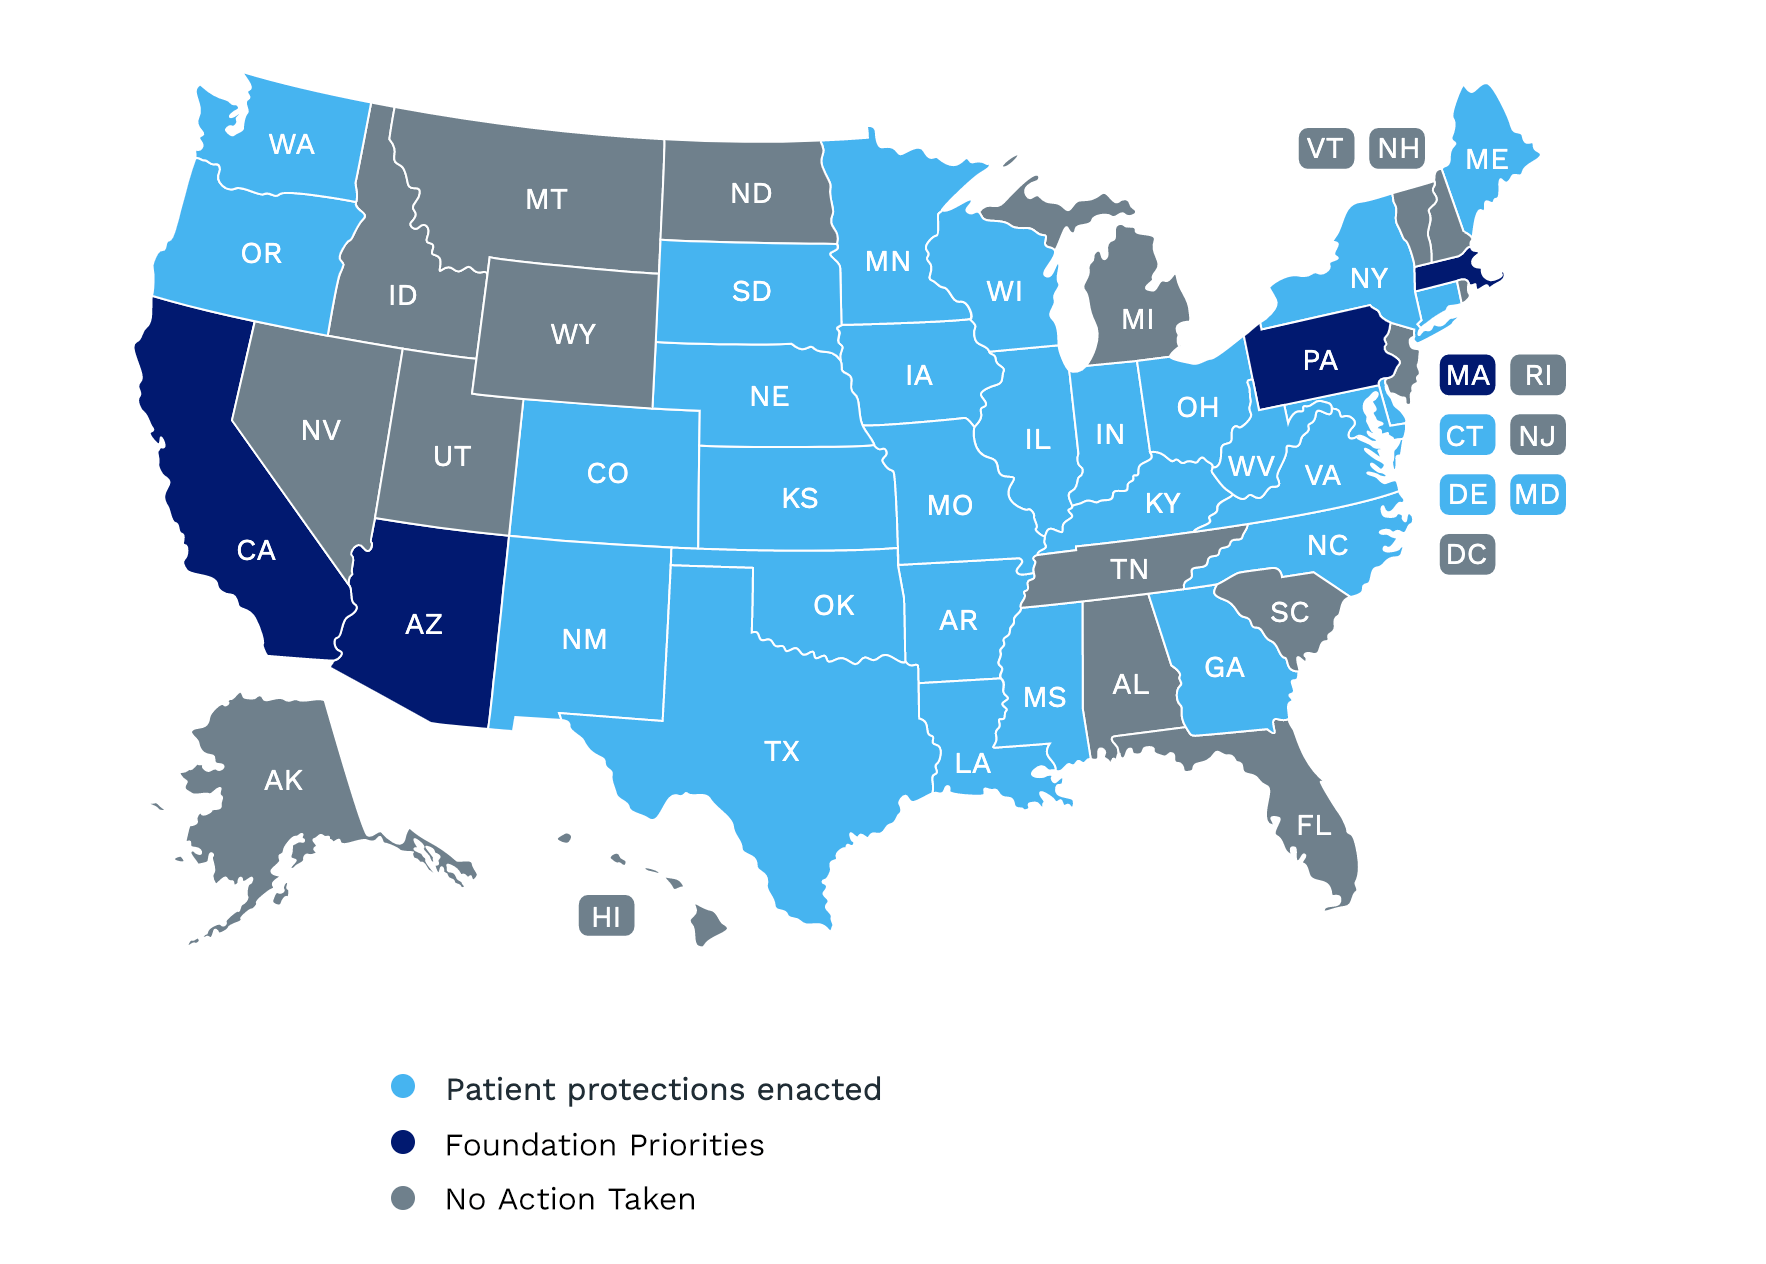 map of united states shaded to show which states have patient protection enacted, foundation priorities or no action taken